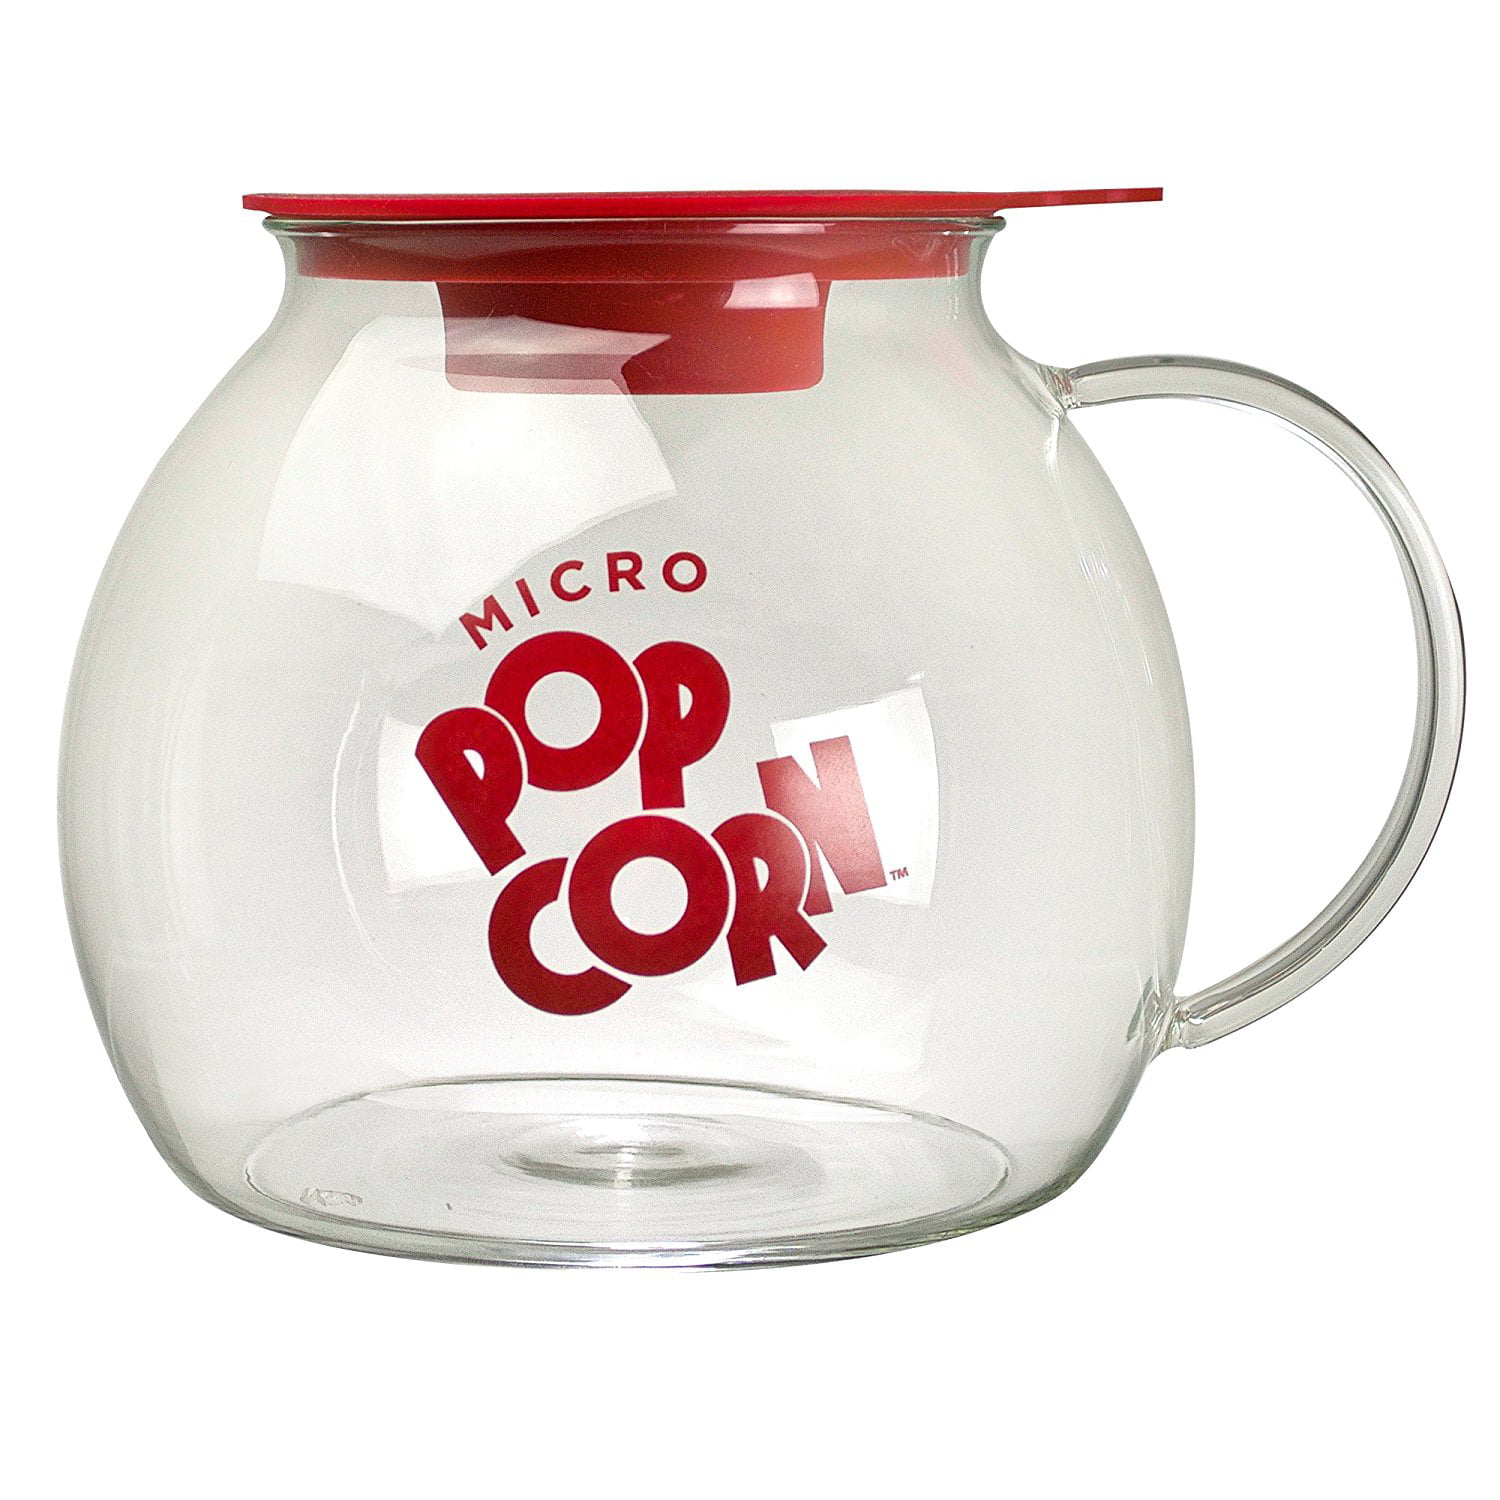  Ecolution Micro-Pop Popper, Glass Microwave Popcorn Maker with  Dual Function Lid, 3 Qt: Home & Kitchen